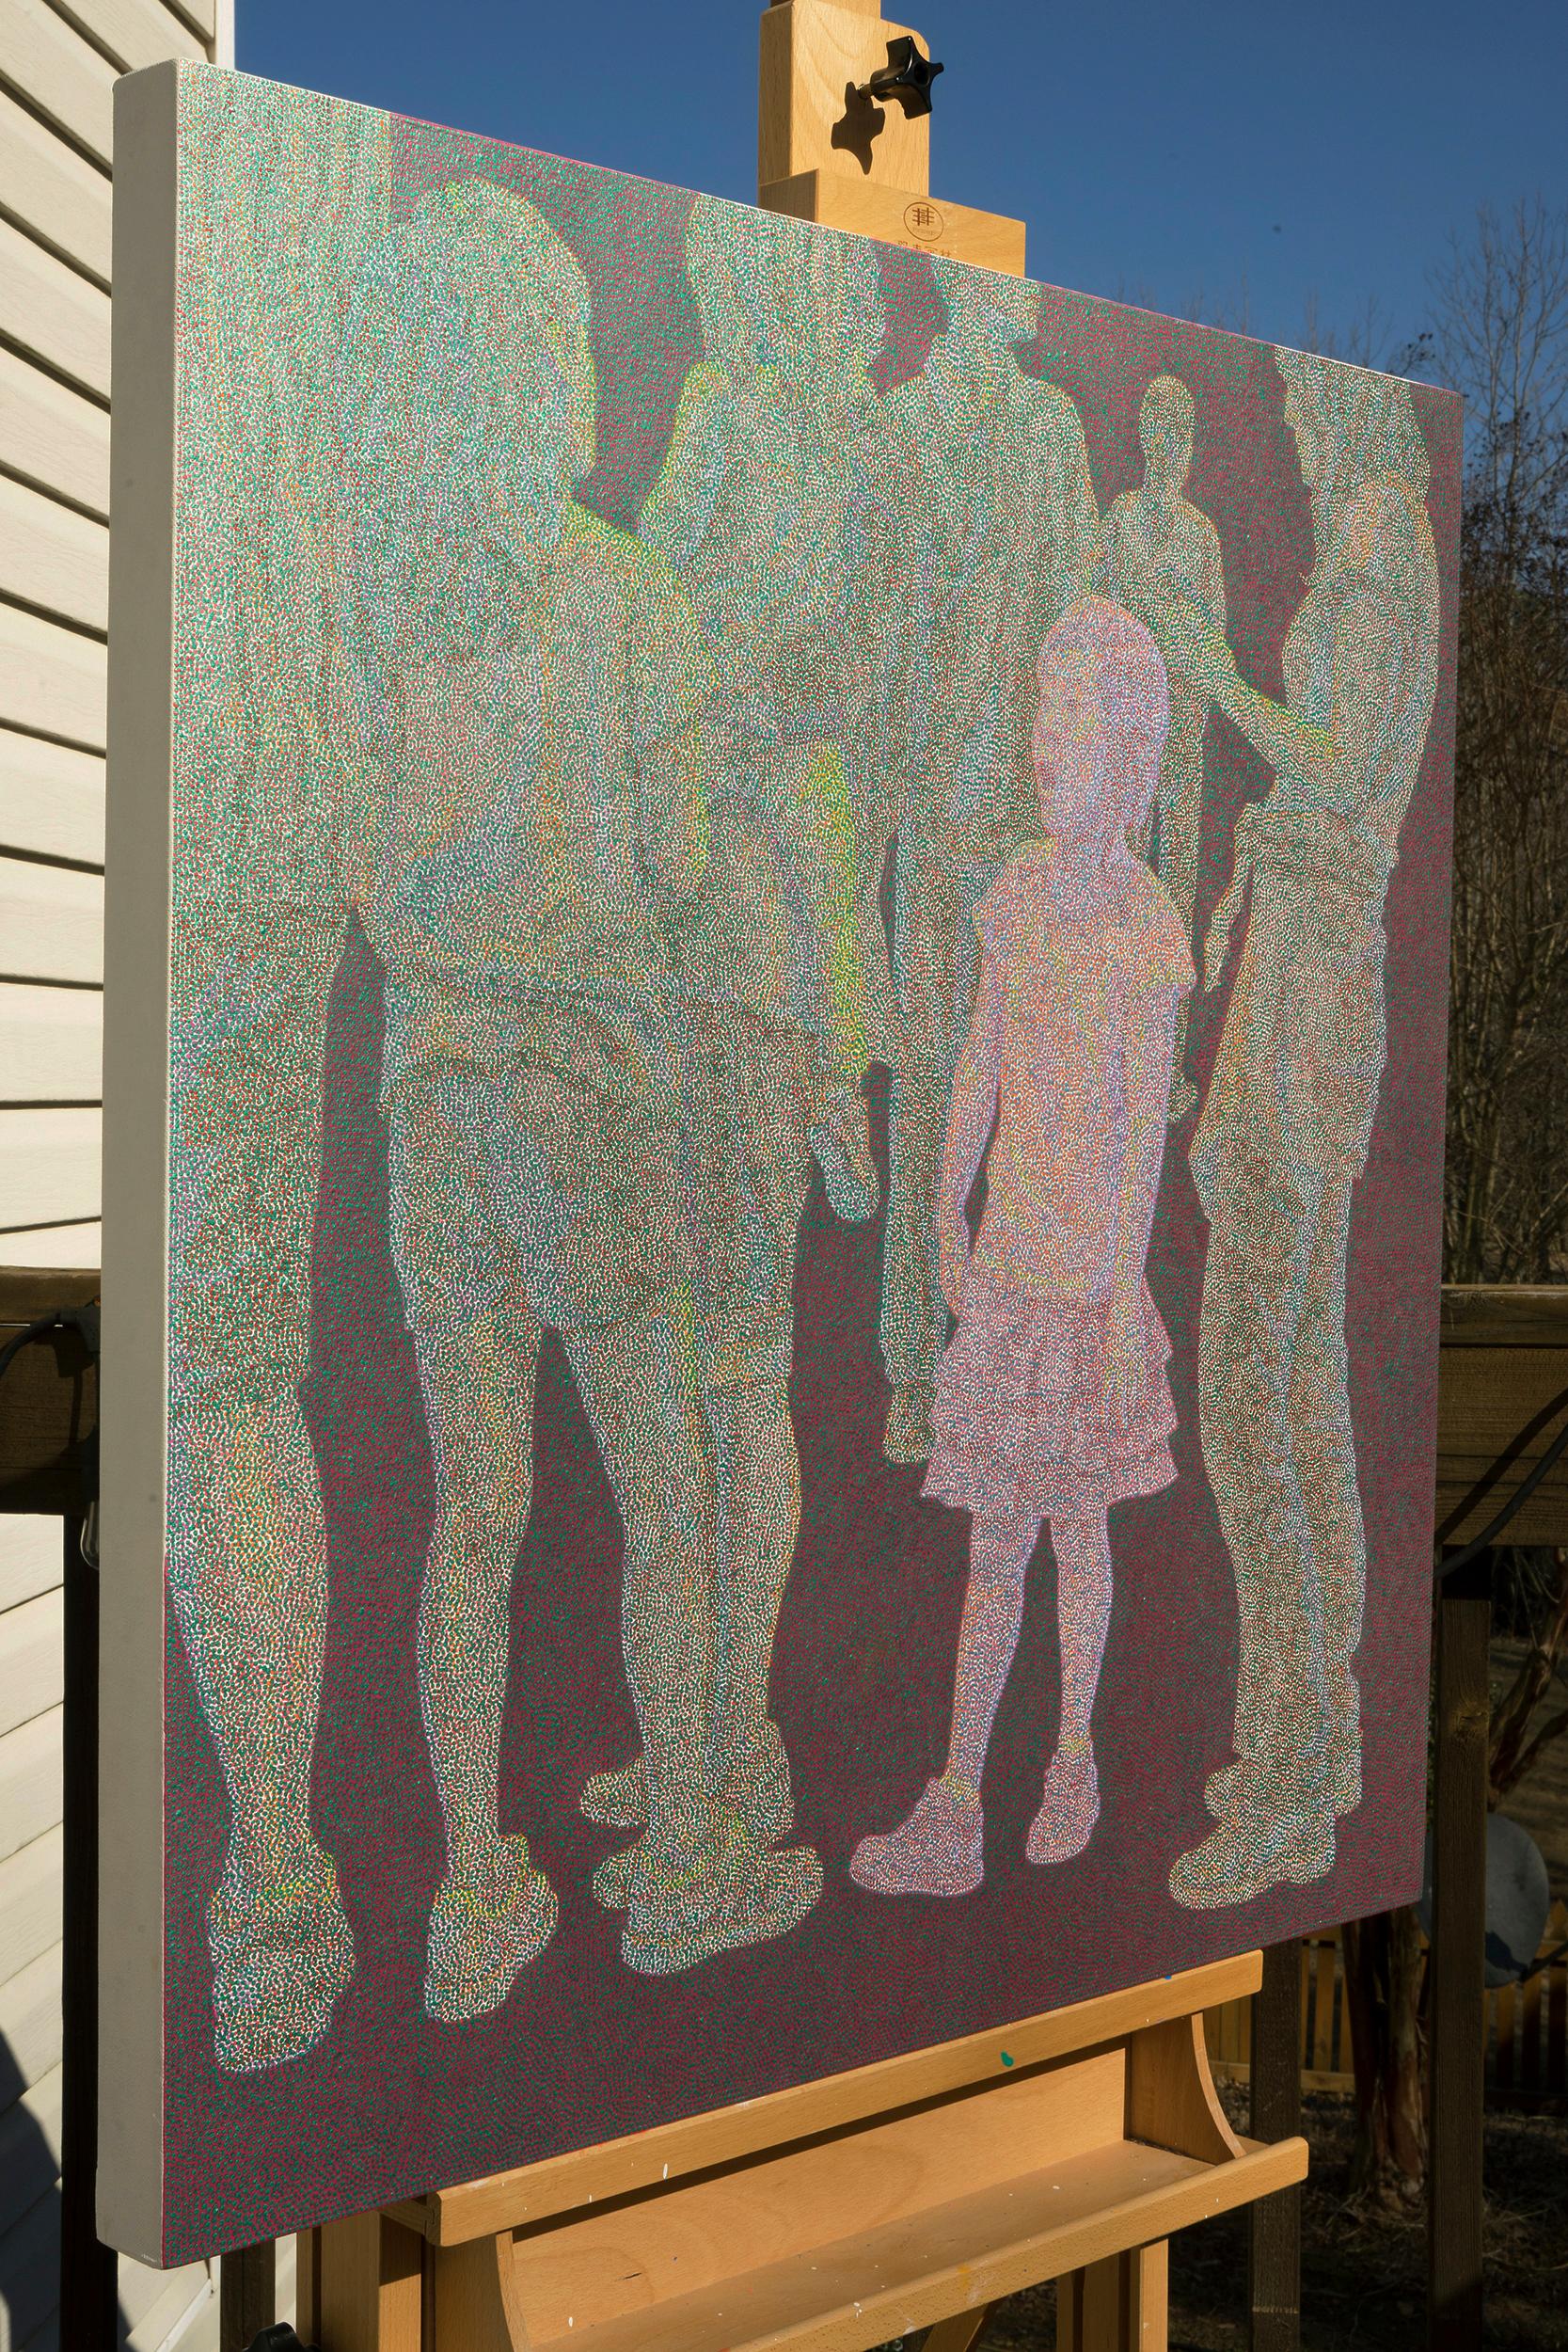 <p>Artist Comments<br>Artist Hyoungseok Kim paints human figures in green pointillism except for a little girl in pink. He emphasizes nature's material and scientific features by expressing the flow of dots or particles. Hyoungseok shares an excerpt